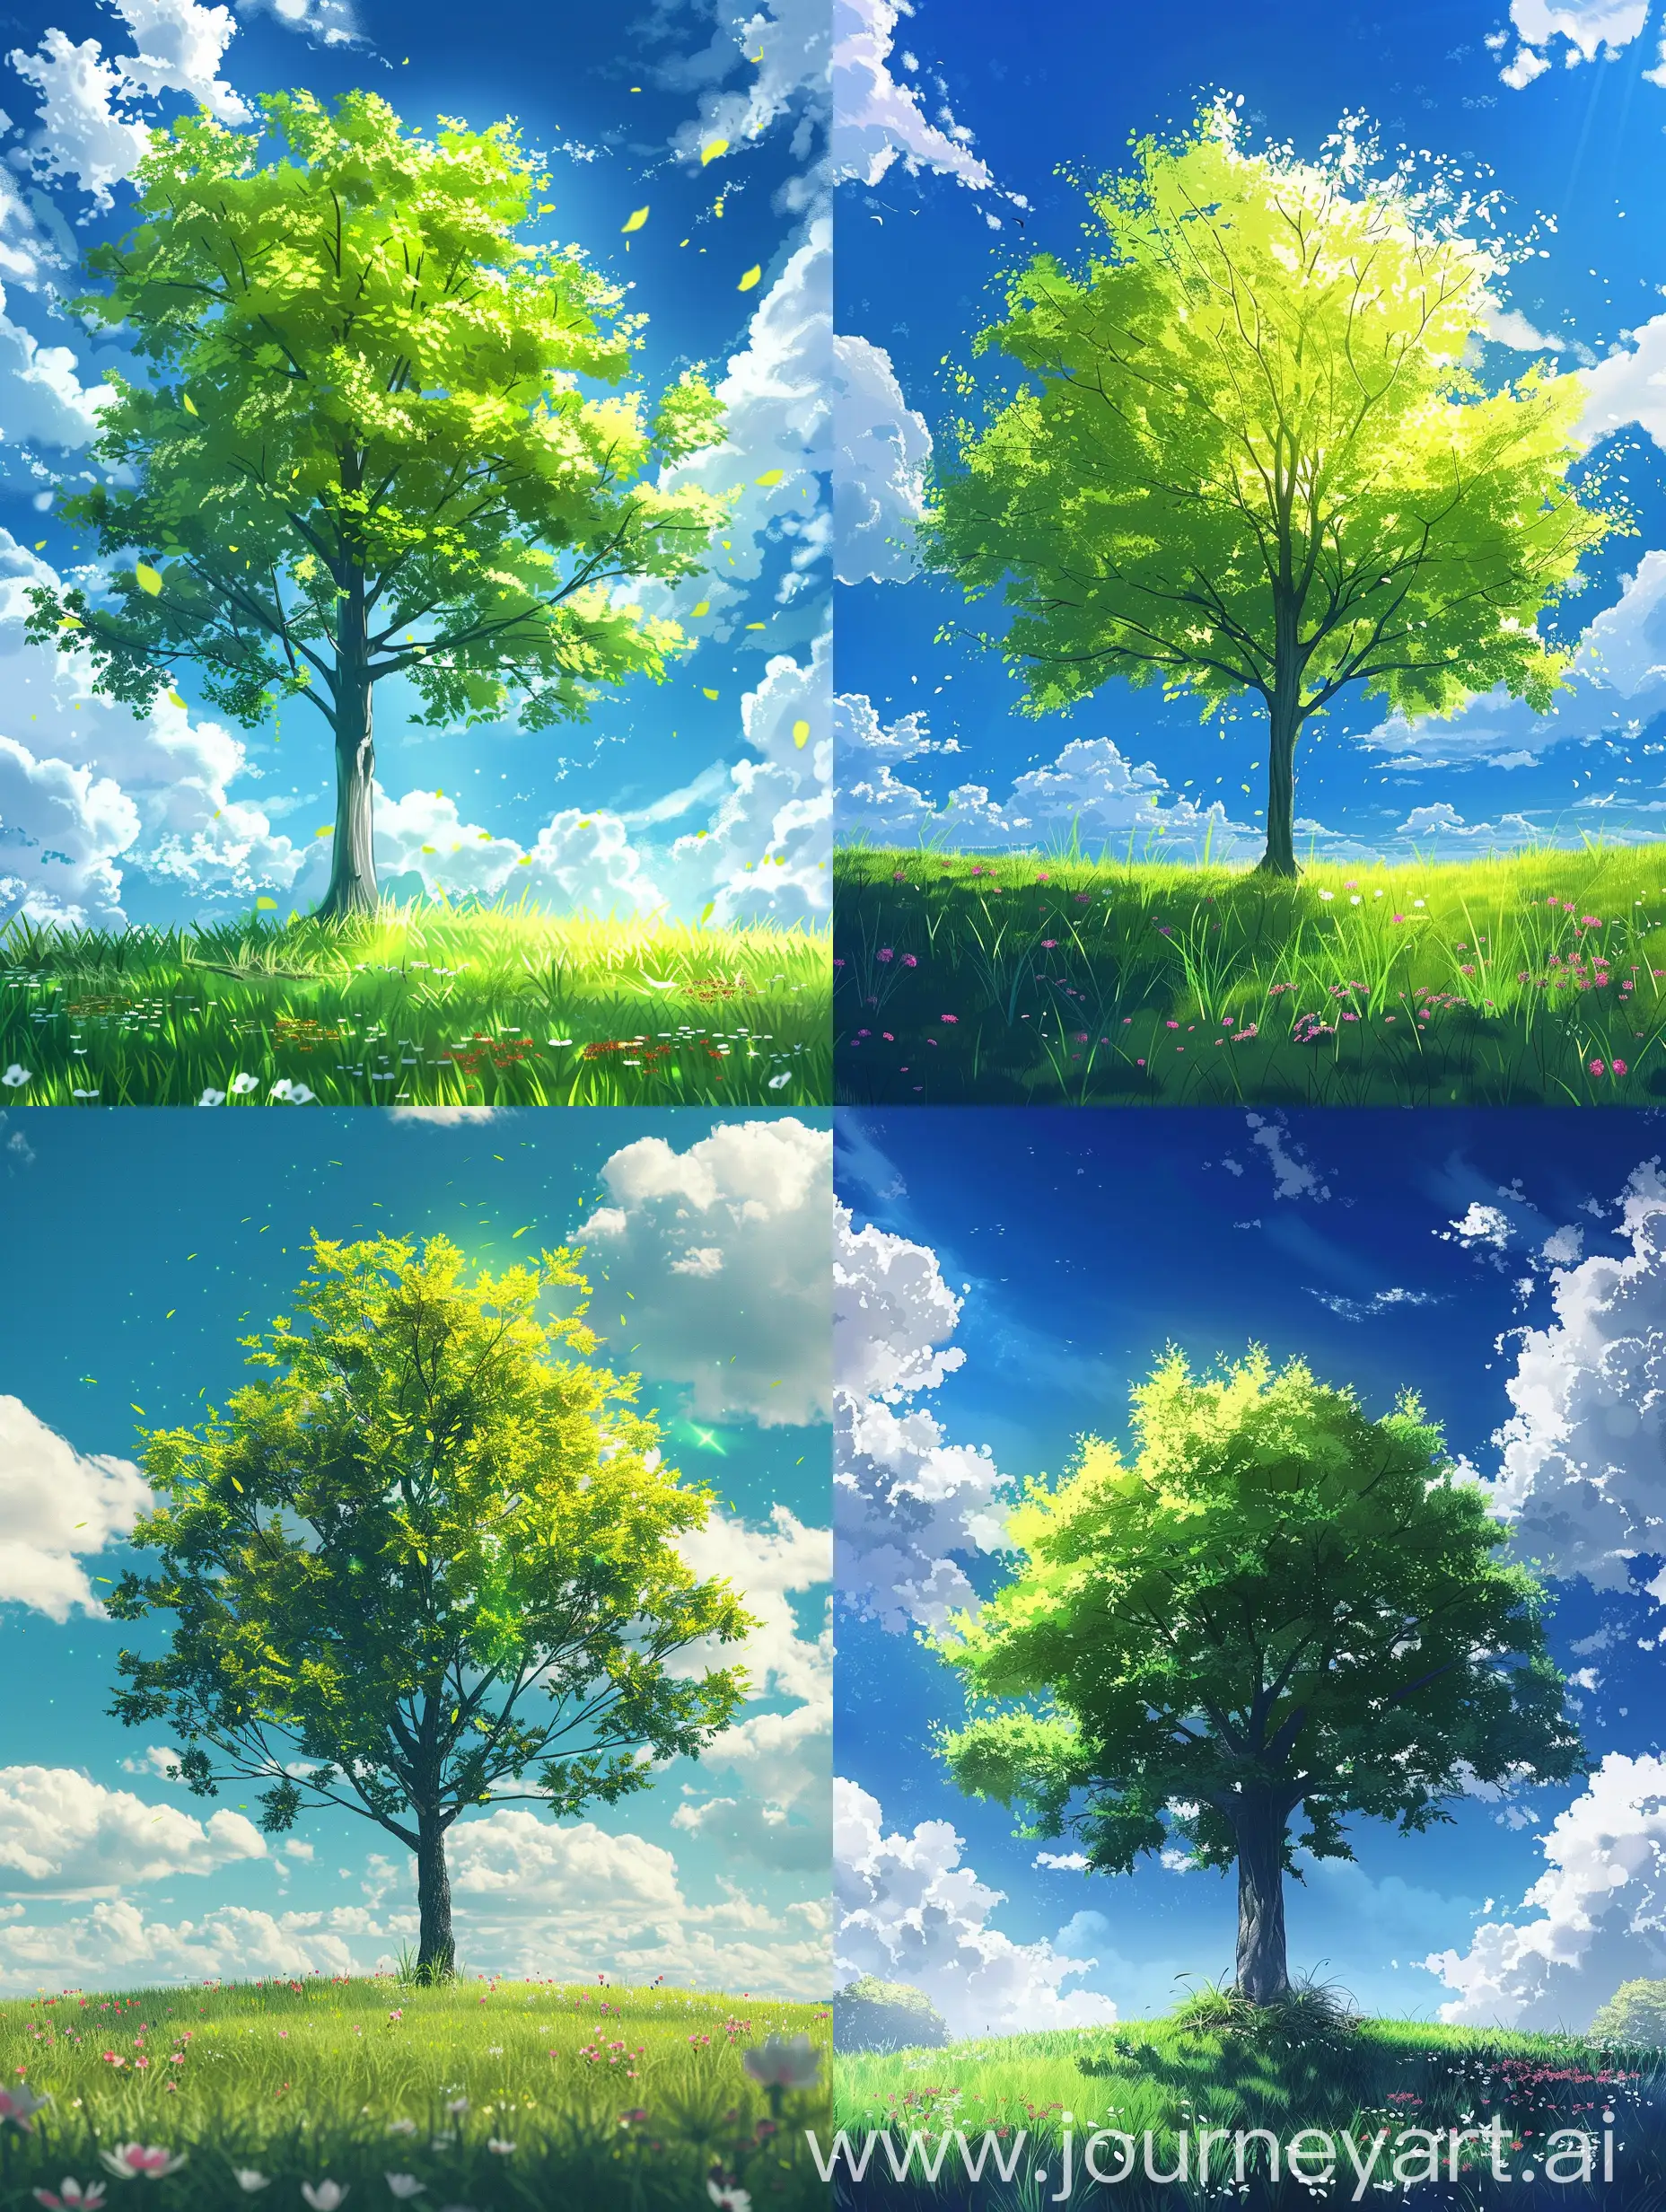 Aesthetic scene, one tree, its leaves glowing green, grass, blue sky, white clouds, anime style, creative, flowers in the grass, empty place.